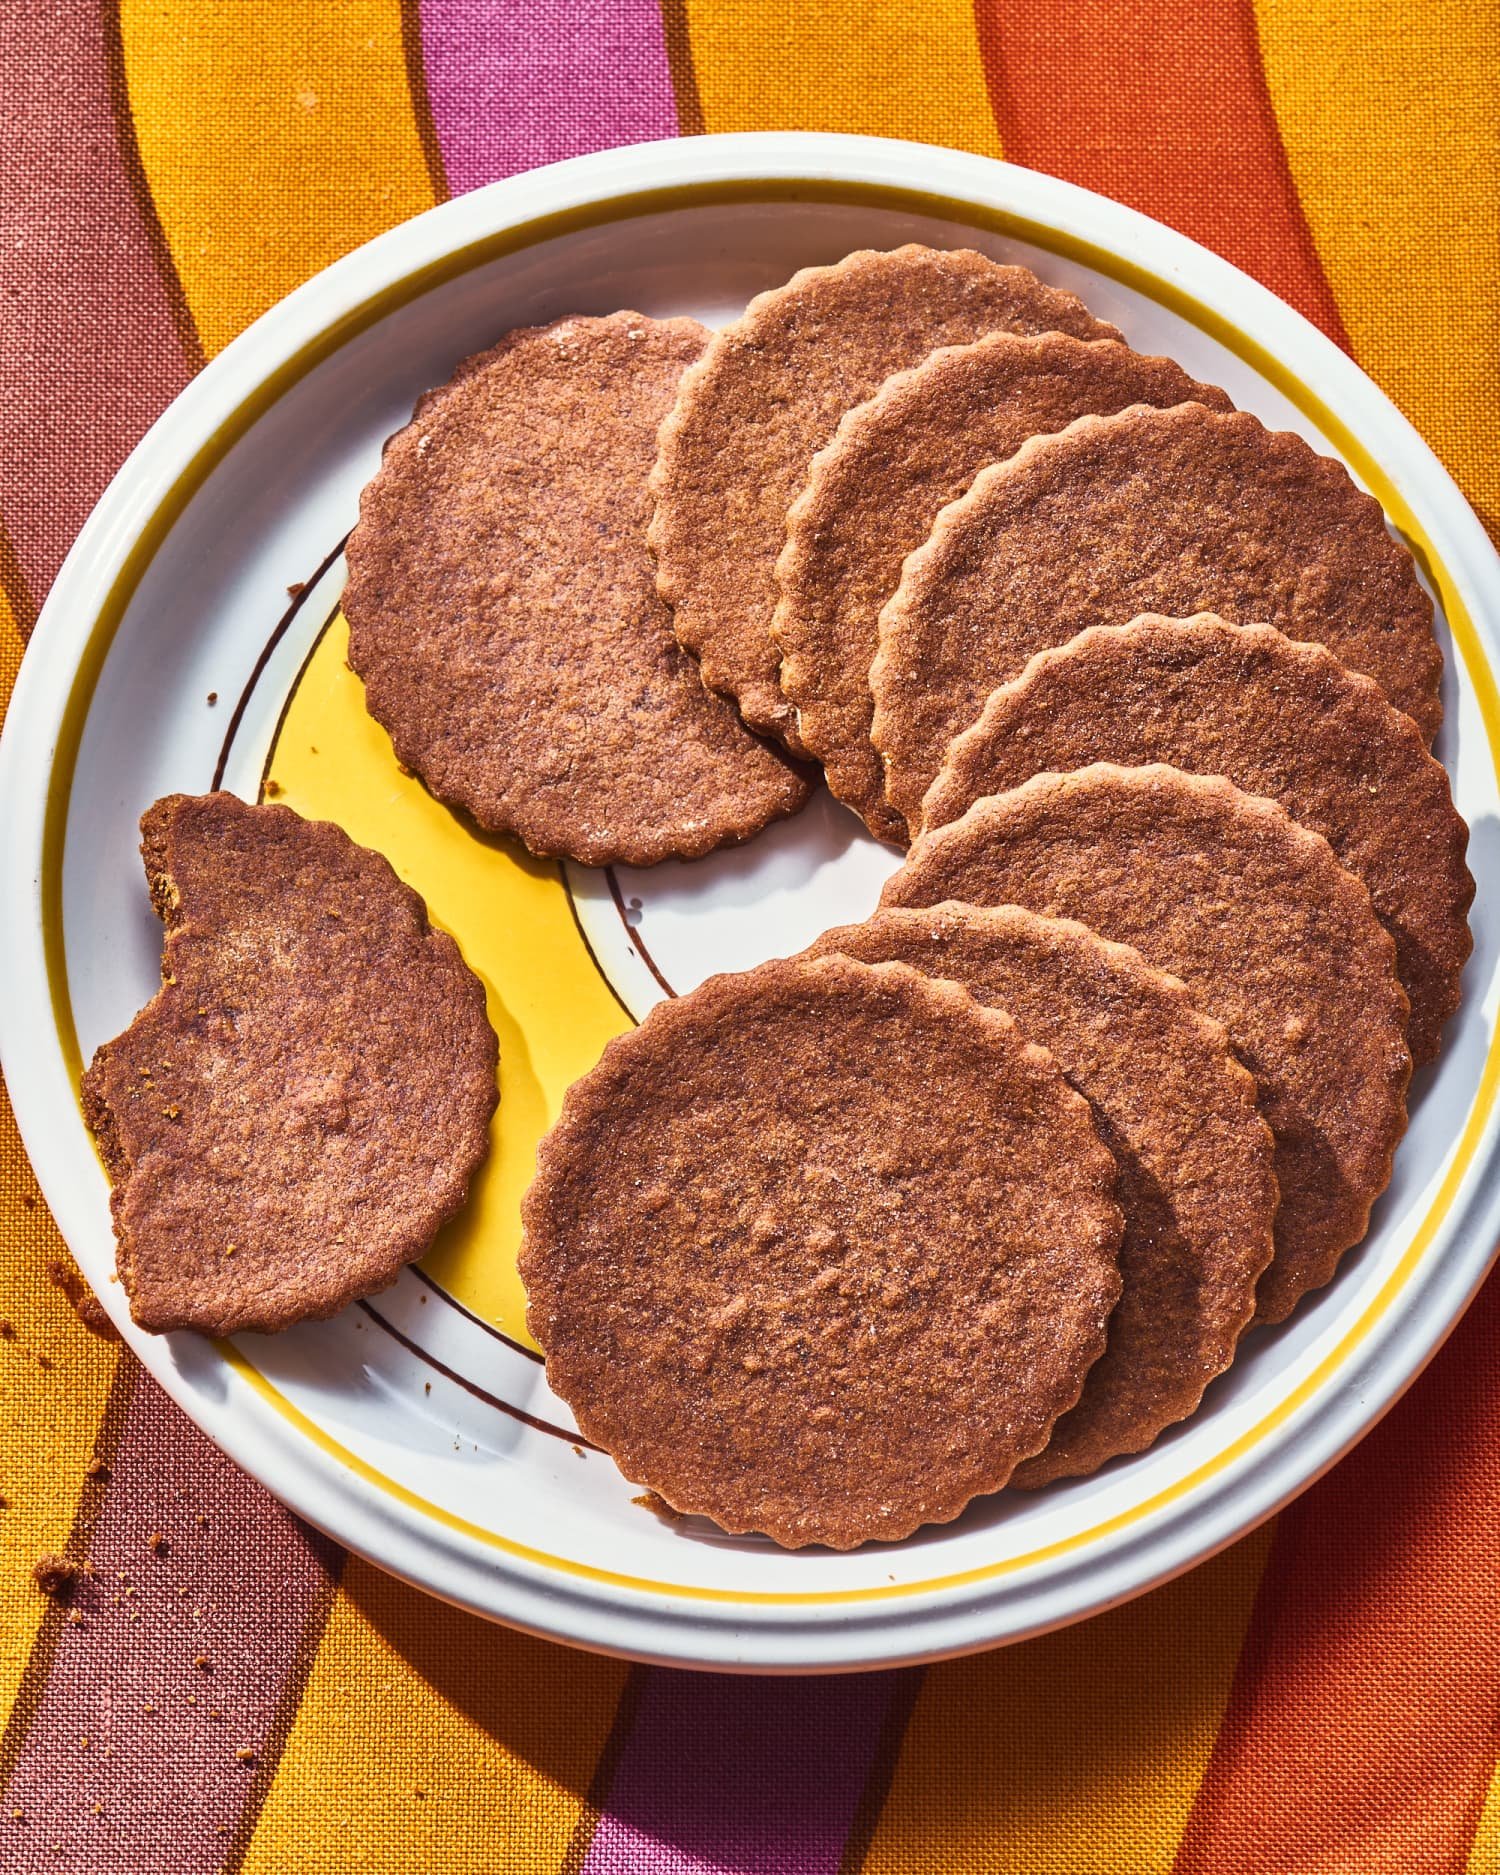 Impossibly Thin Moravian Spice Cookies Are a '70s Throwback